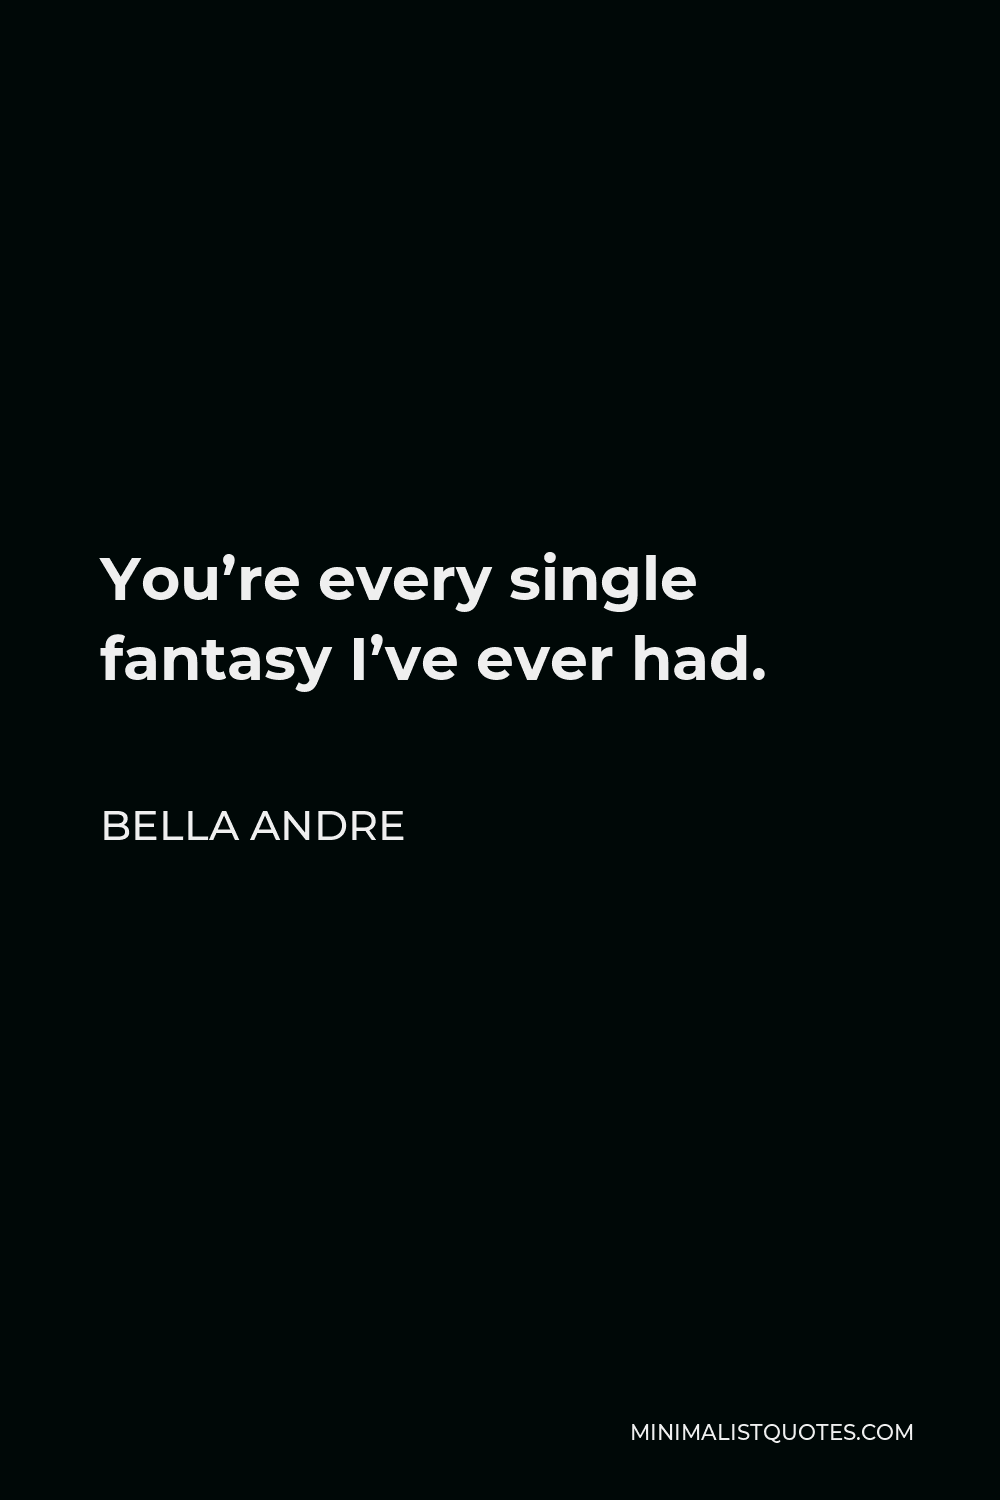 Bella Andre Quote - You’re every single fantasy I’ve ever had.